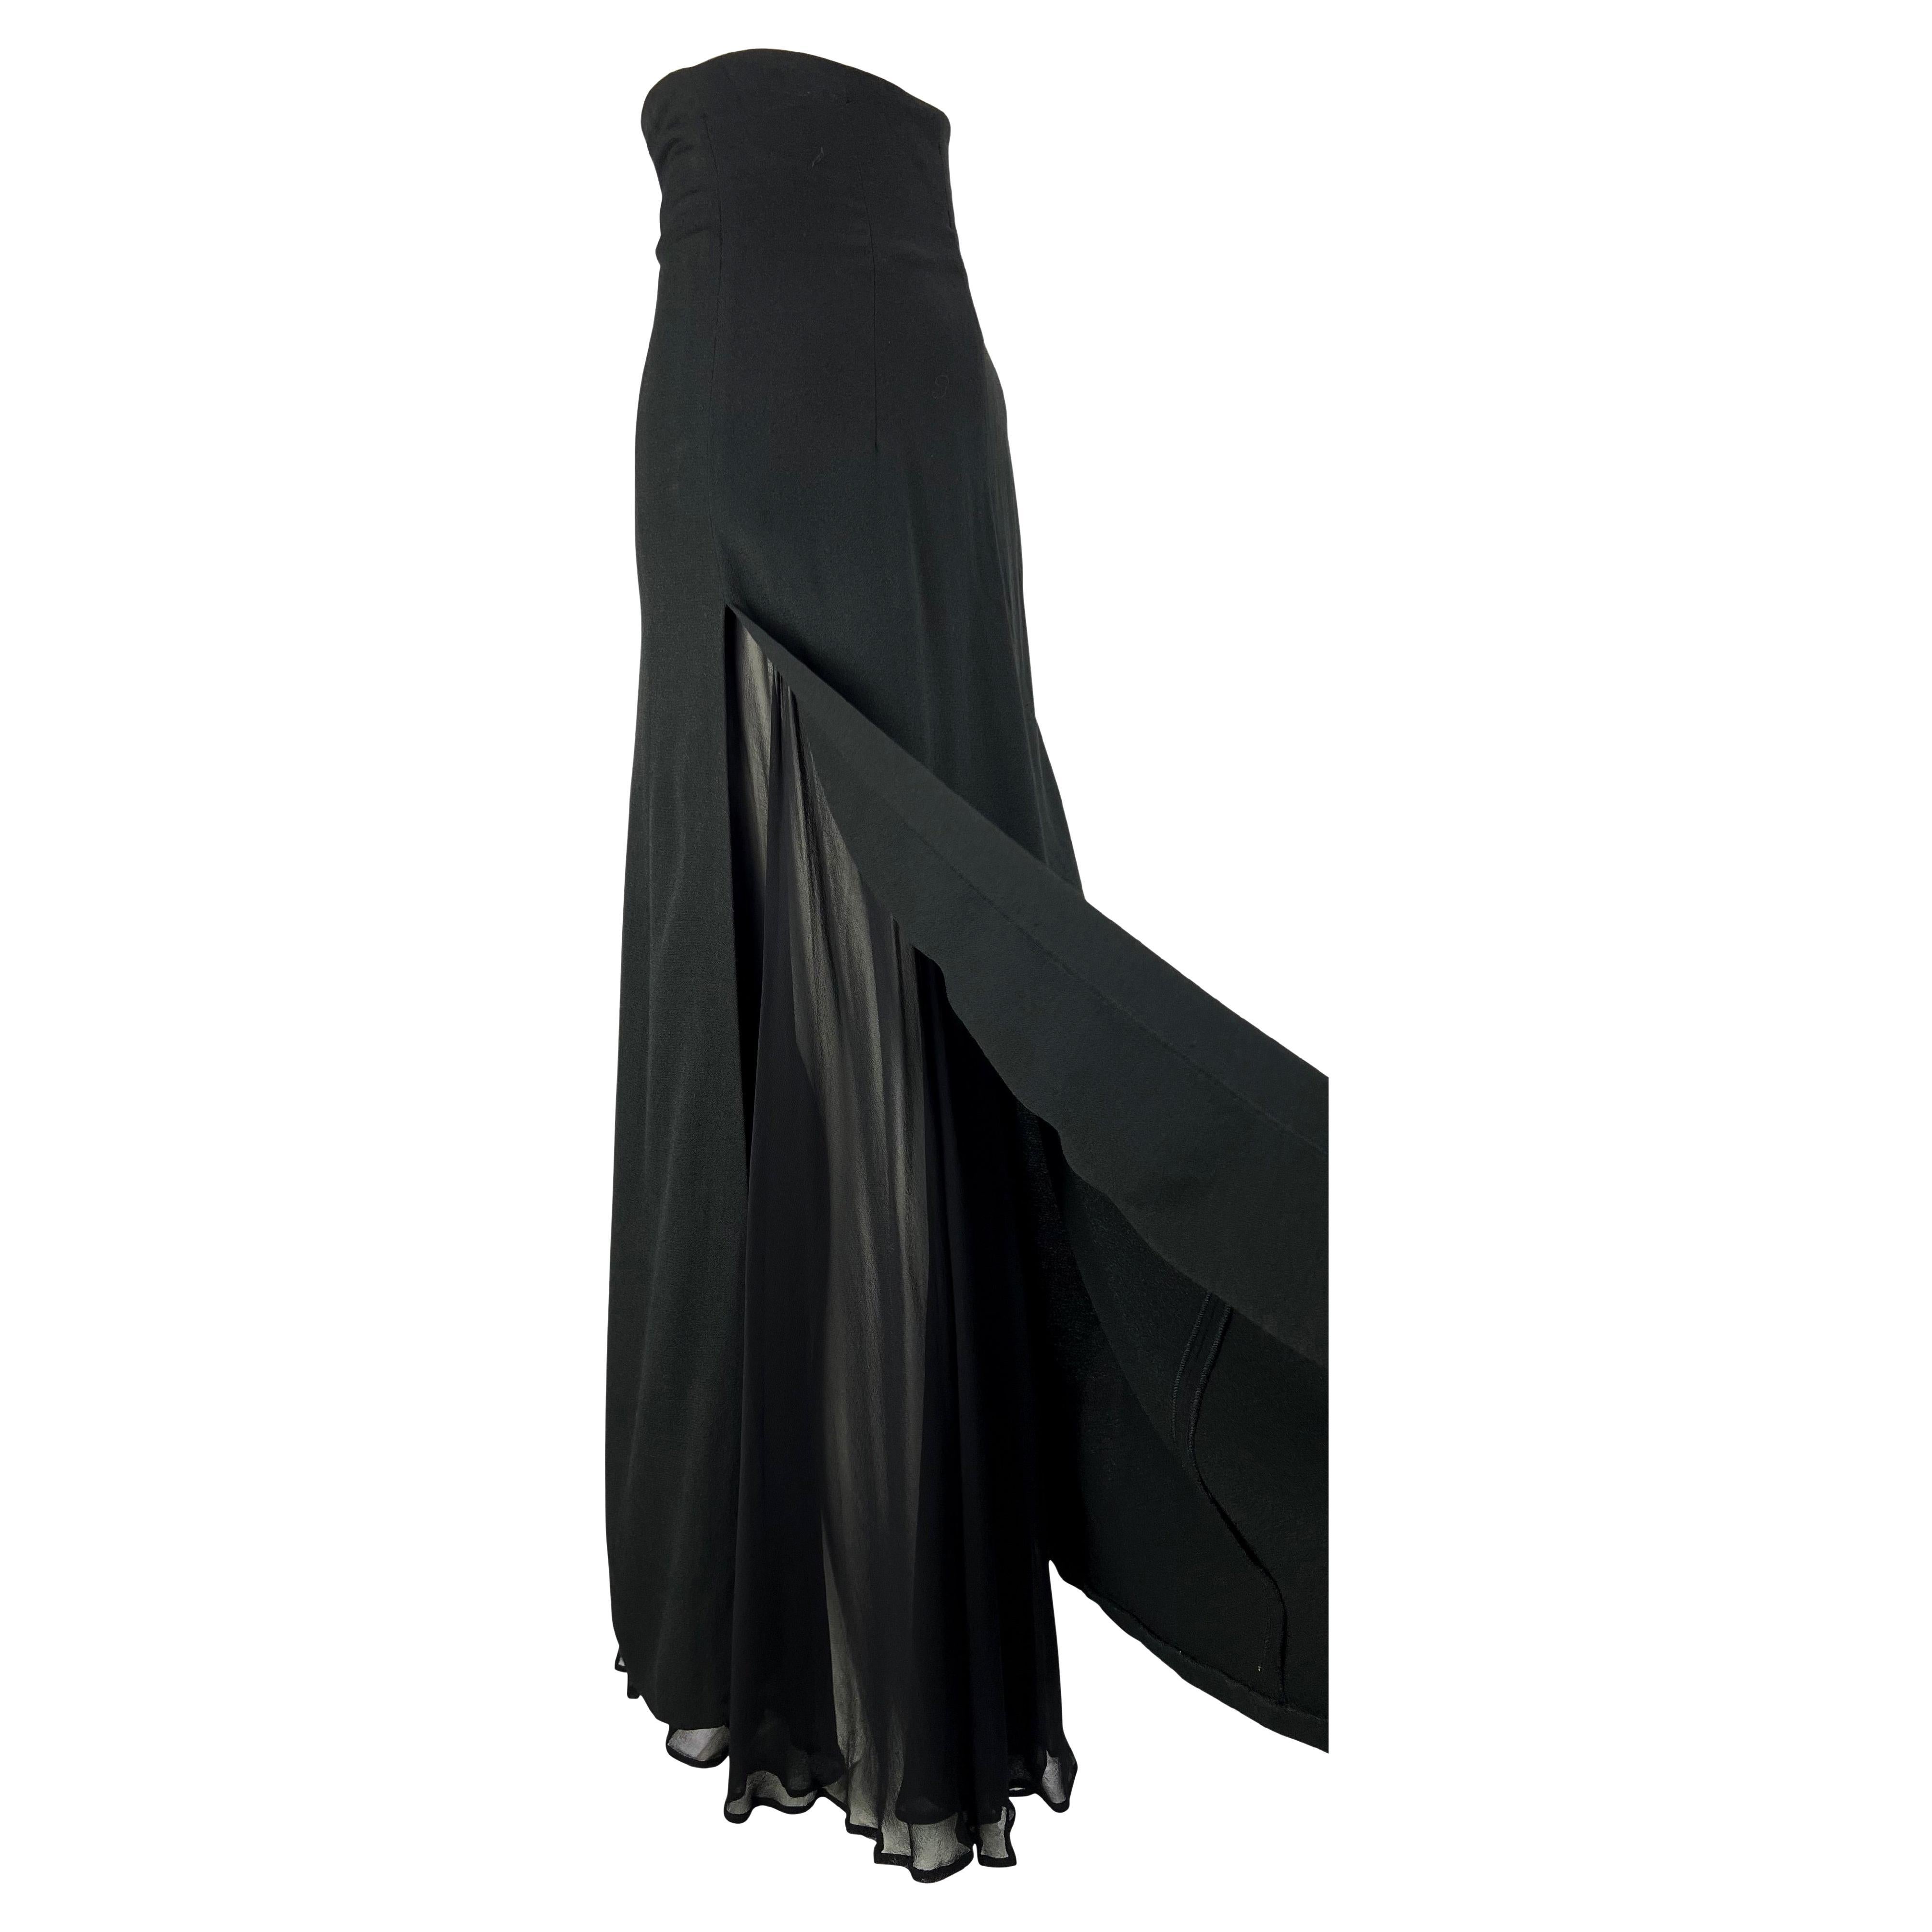 Presenting a high-waisted Dolce & Gabbana maxi skirt with a chiffon underskirt. Designed in the 1990s, this piece features a high-thigh slit that reveals the sheer black chiffon underskirt. The high-waist slims the silhouette to create the classic